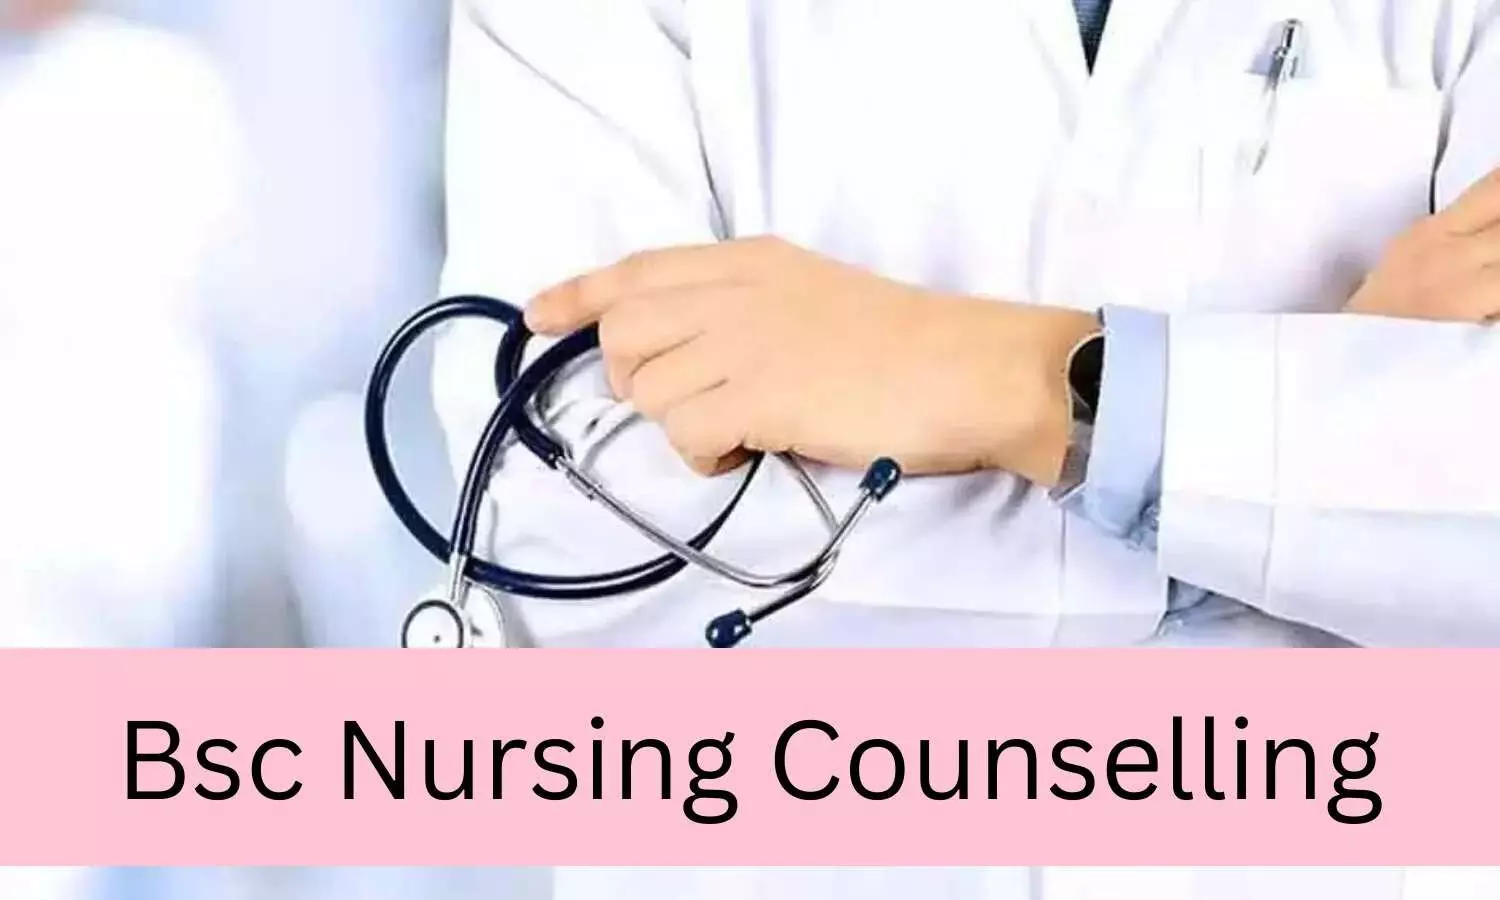 BFUHS To Begin Round 2 Counseling Process For BSc Nursing From 11th September